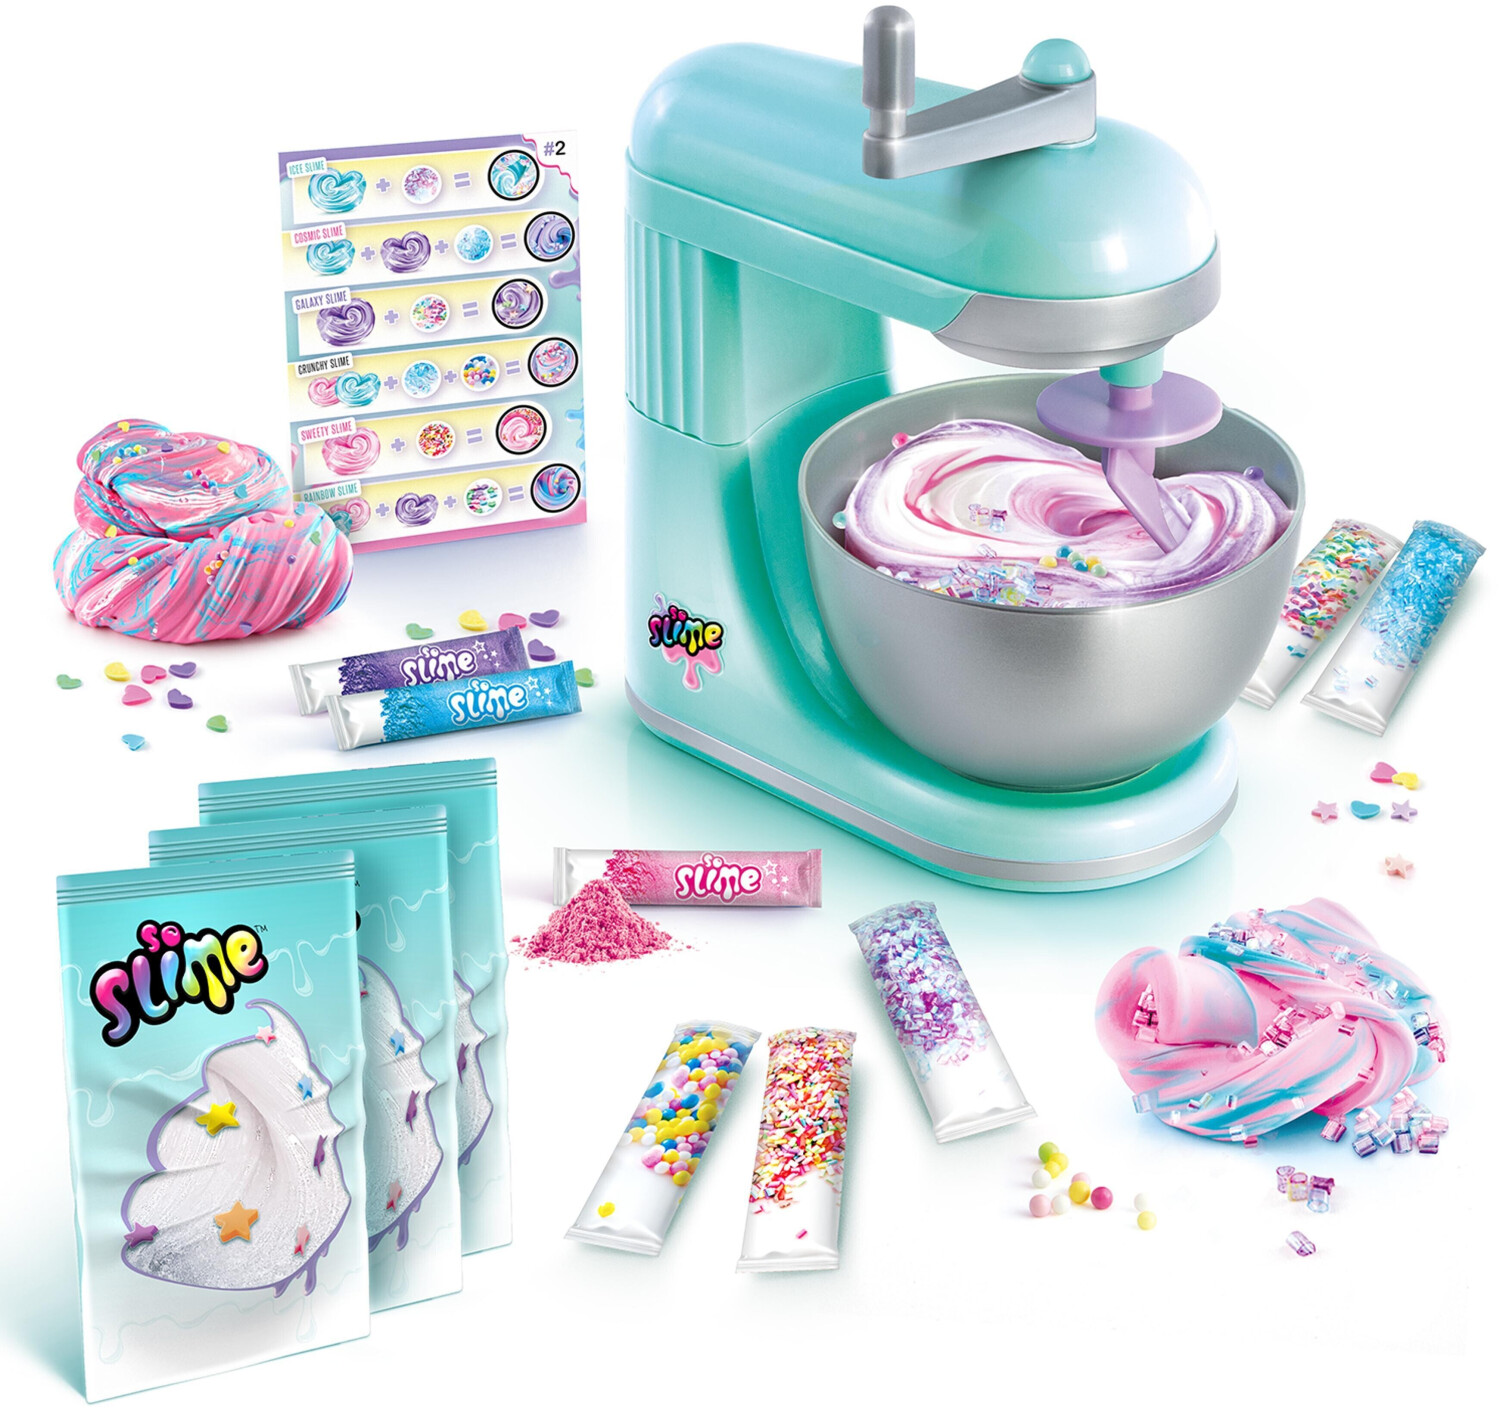 Get Ready to Twist and Slime: Introducing the So Slime Twist 'n' Slime  Mixer! - Canal Toys UK